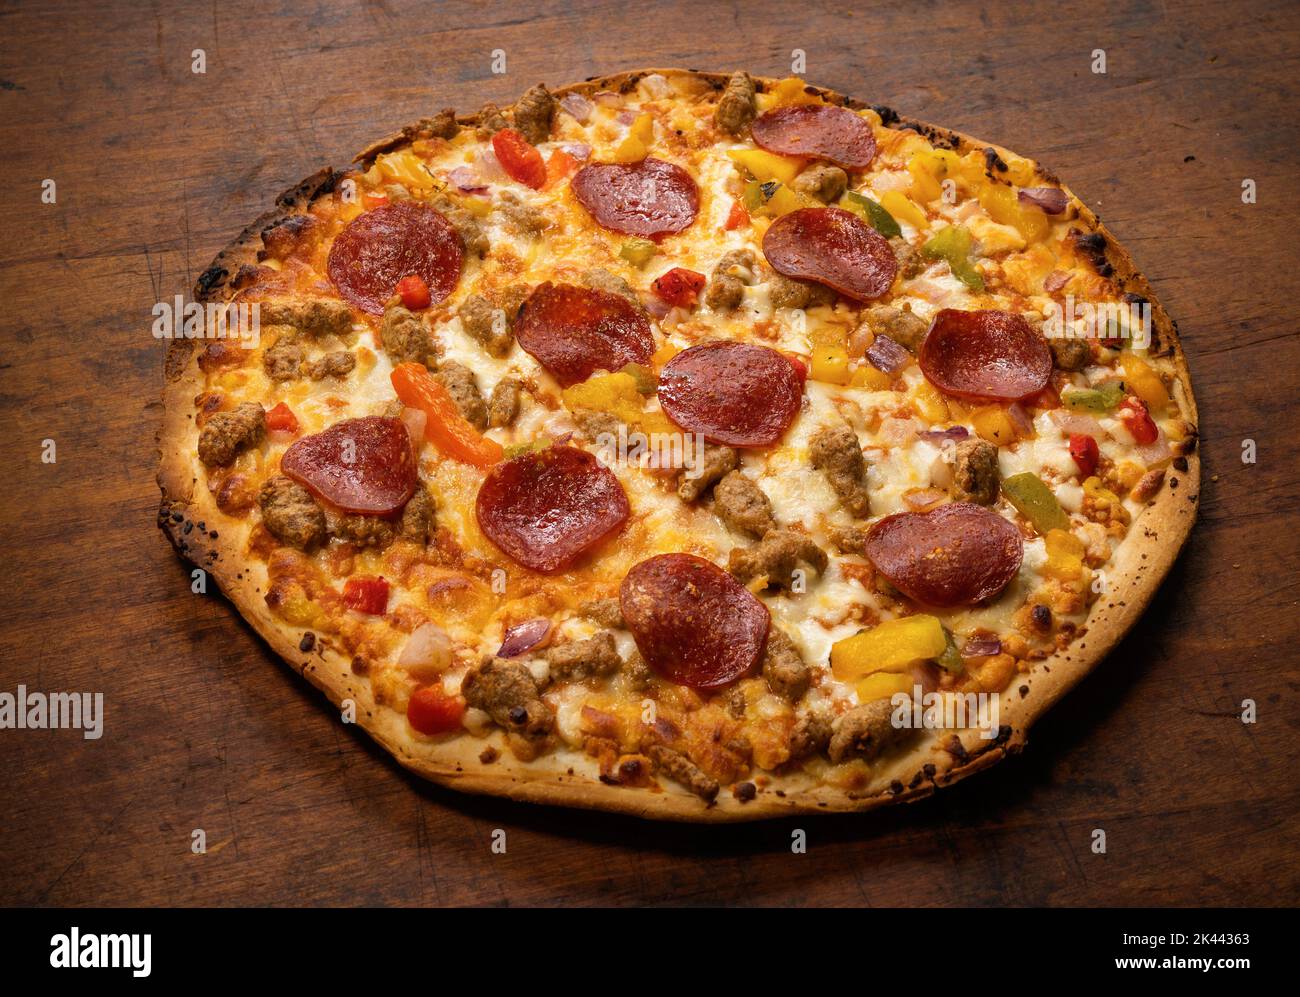 Whole pizza on wooden table Stock Photo